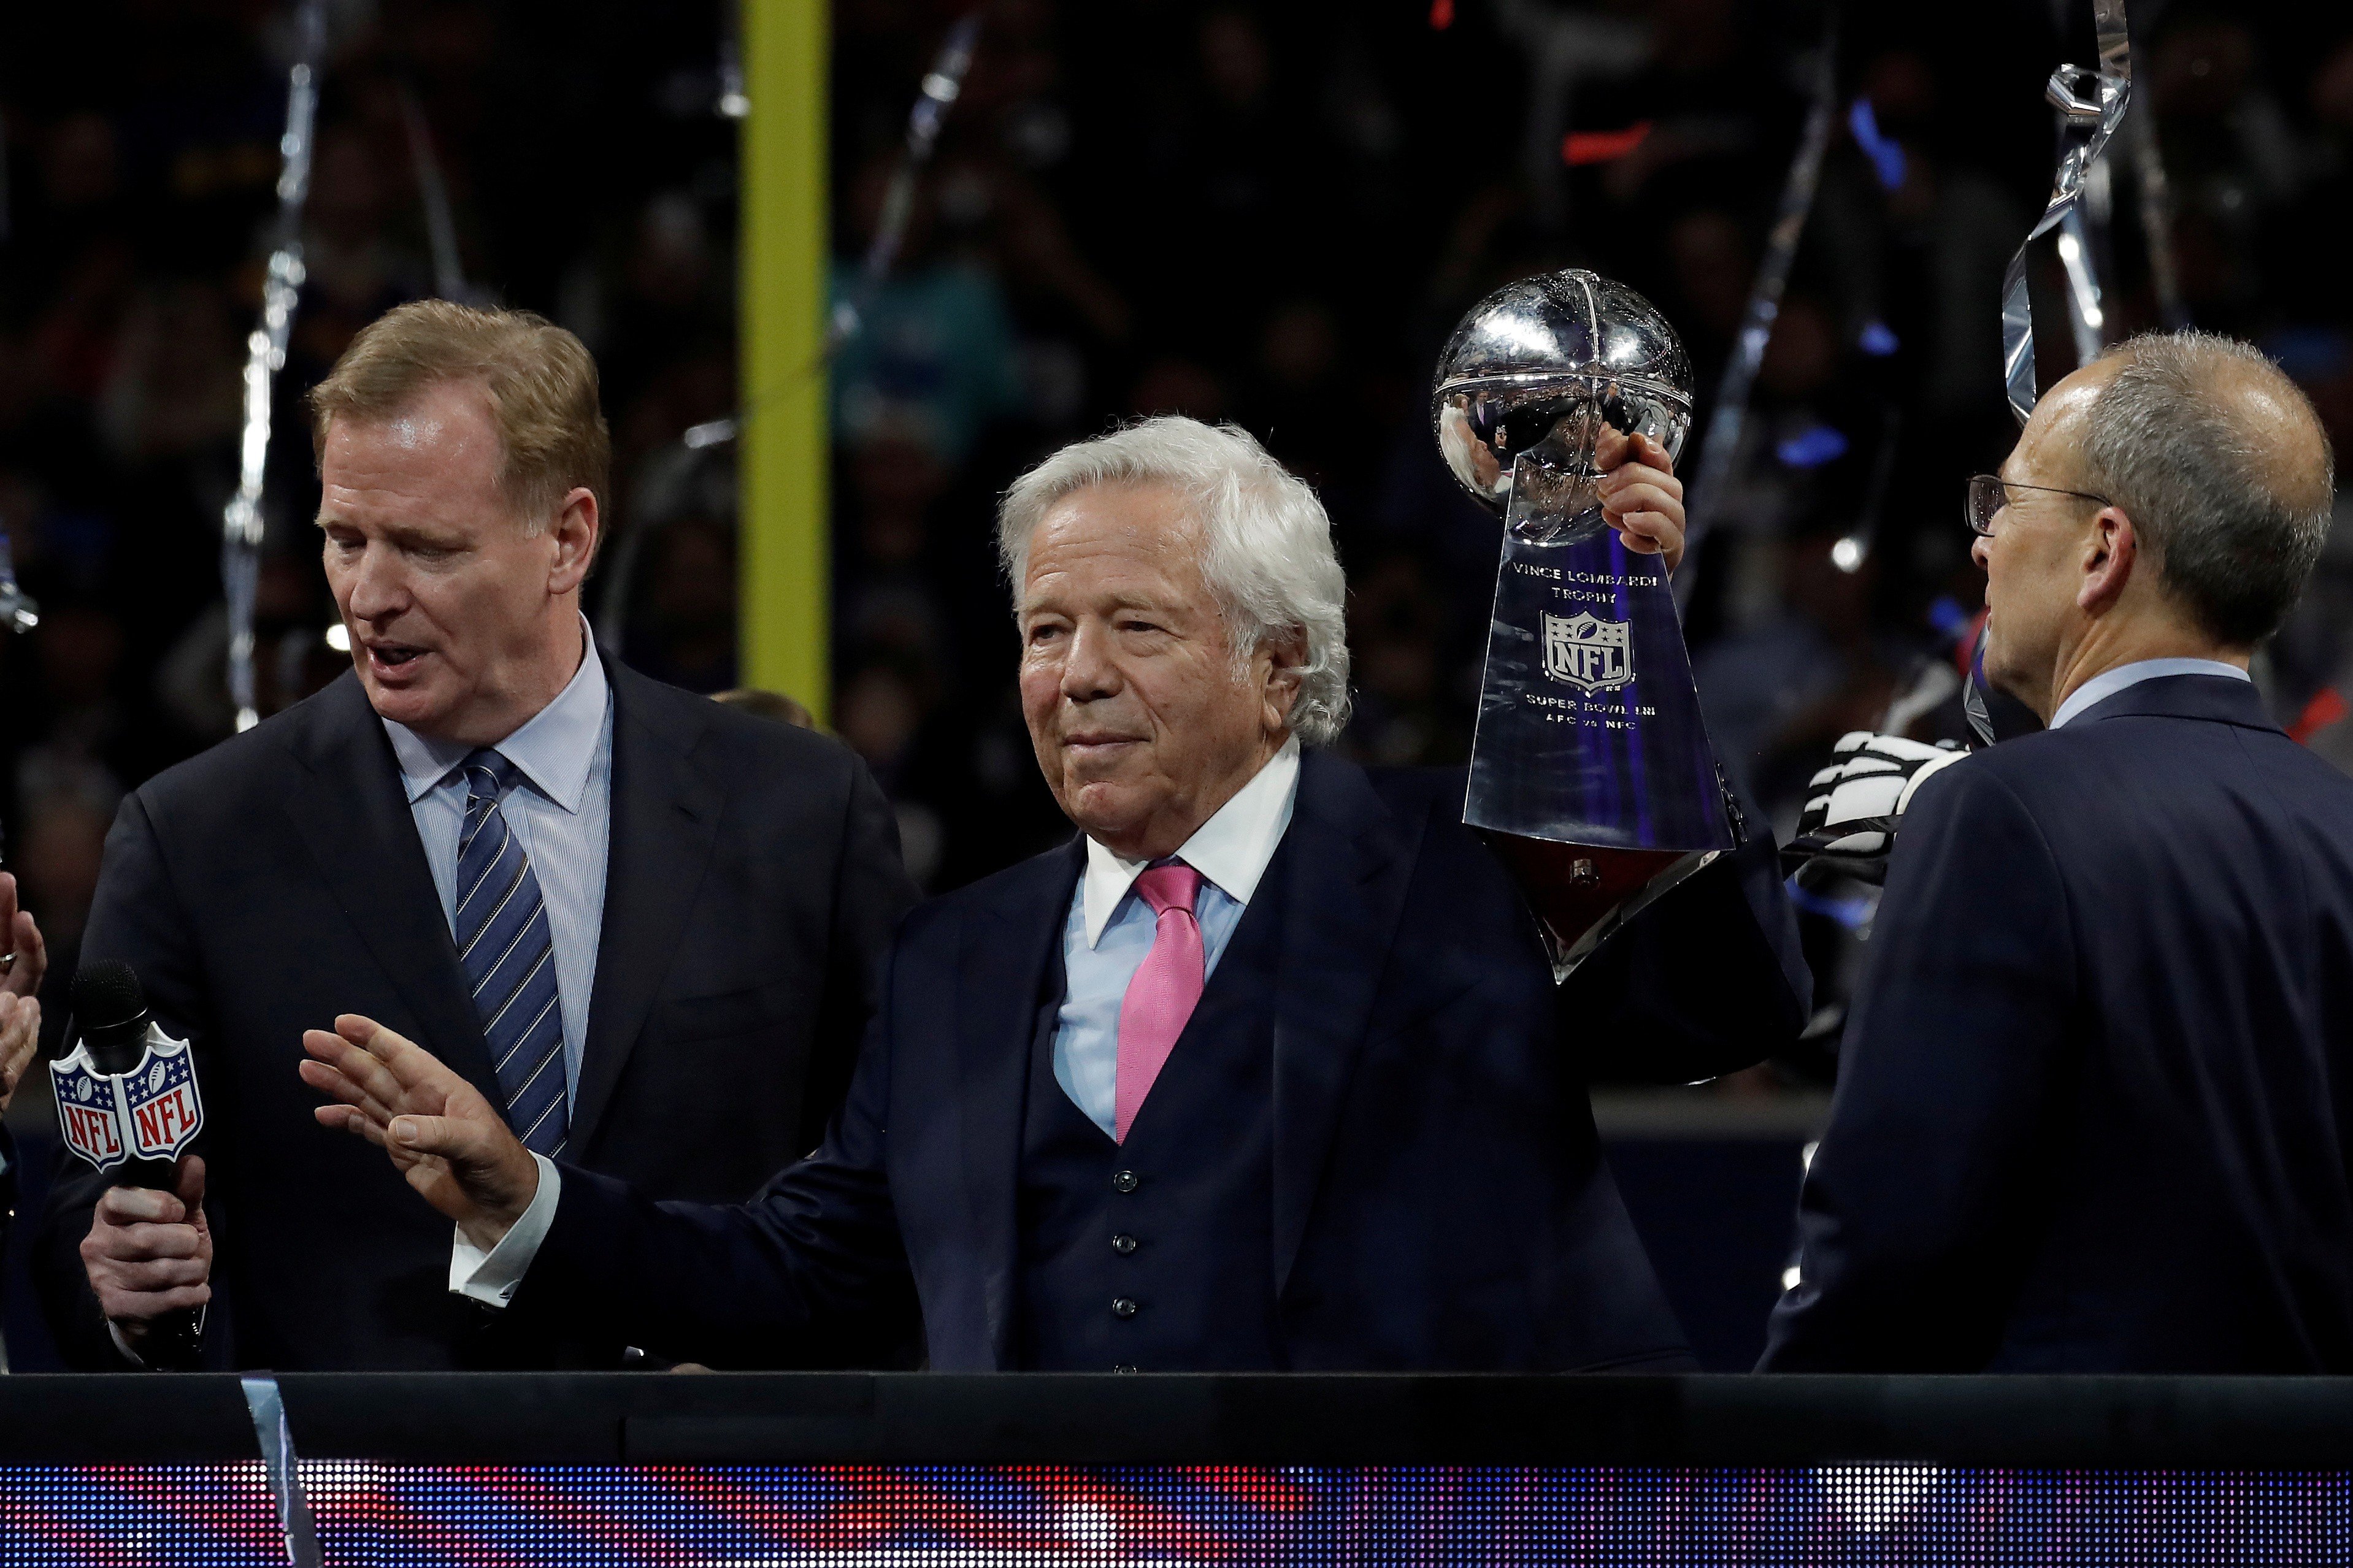 New England Patriots owner Robert Kraft celebrates with the Vince Lombardi Trophy. Photo: Reuters